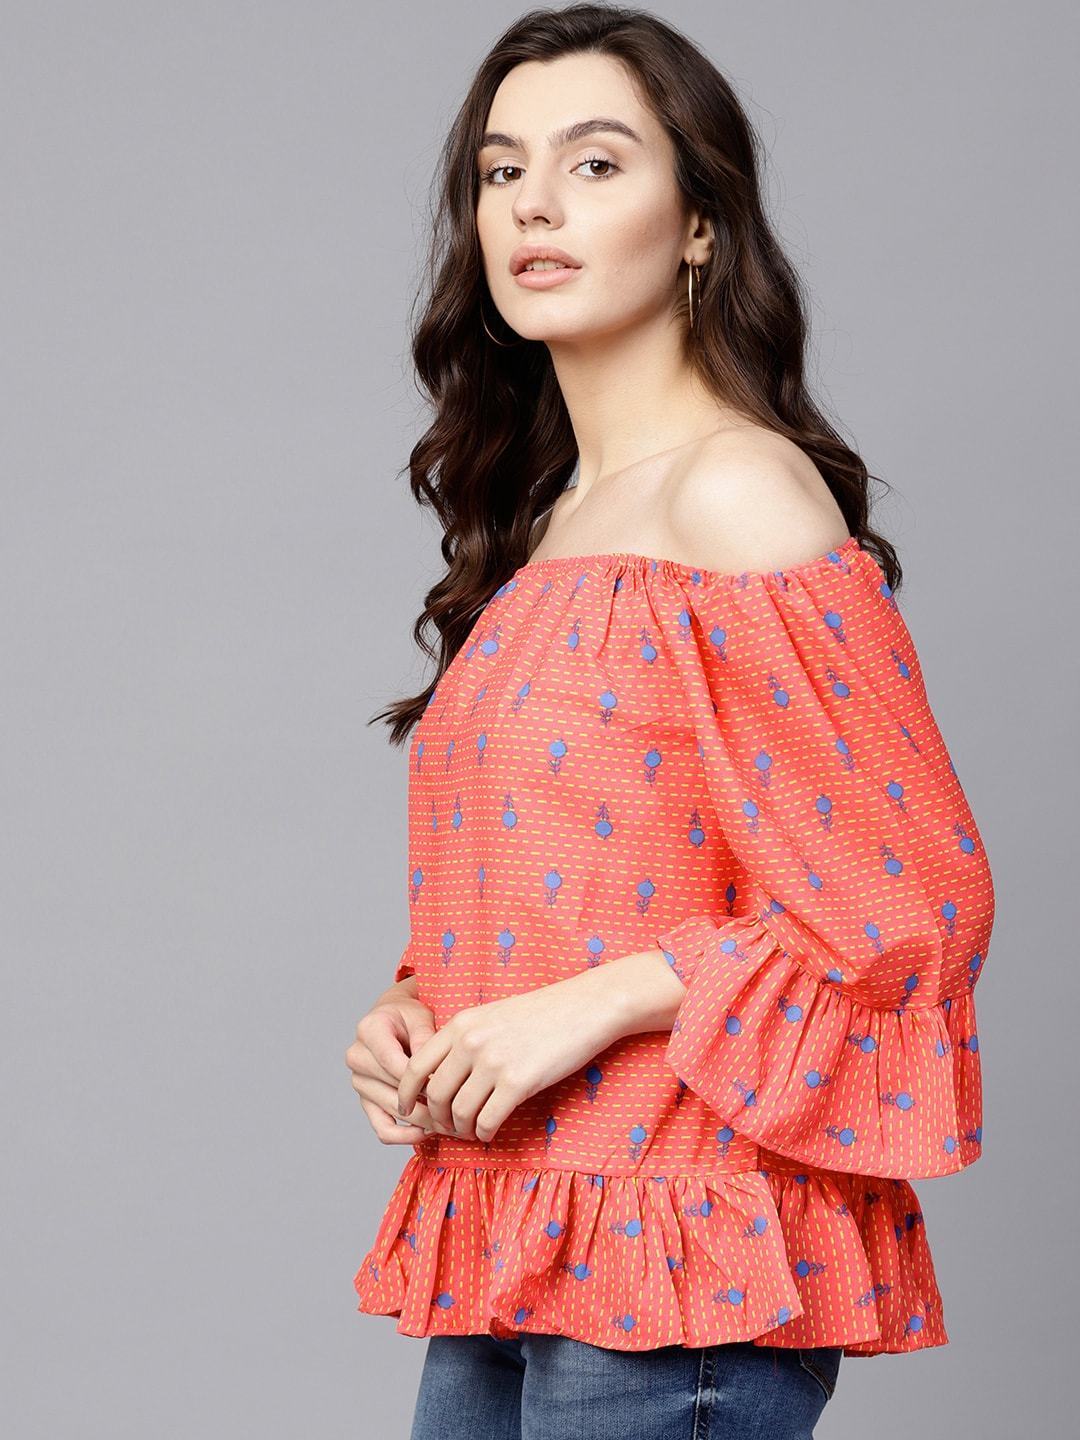 Women's Quirky Off Shoulder Top - Pannkh